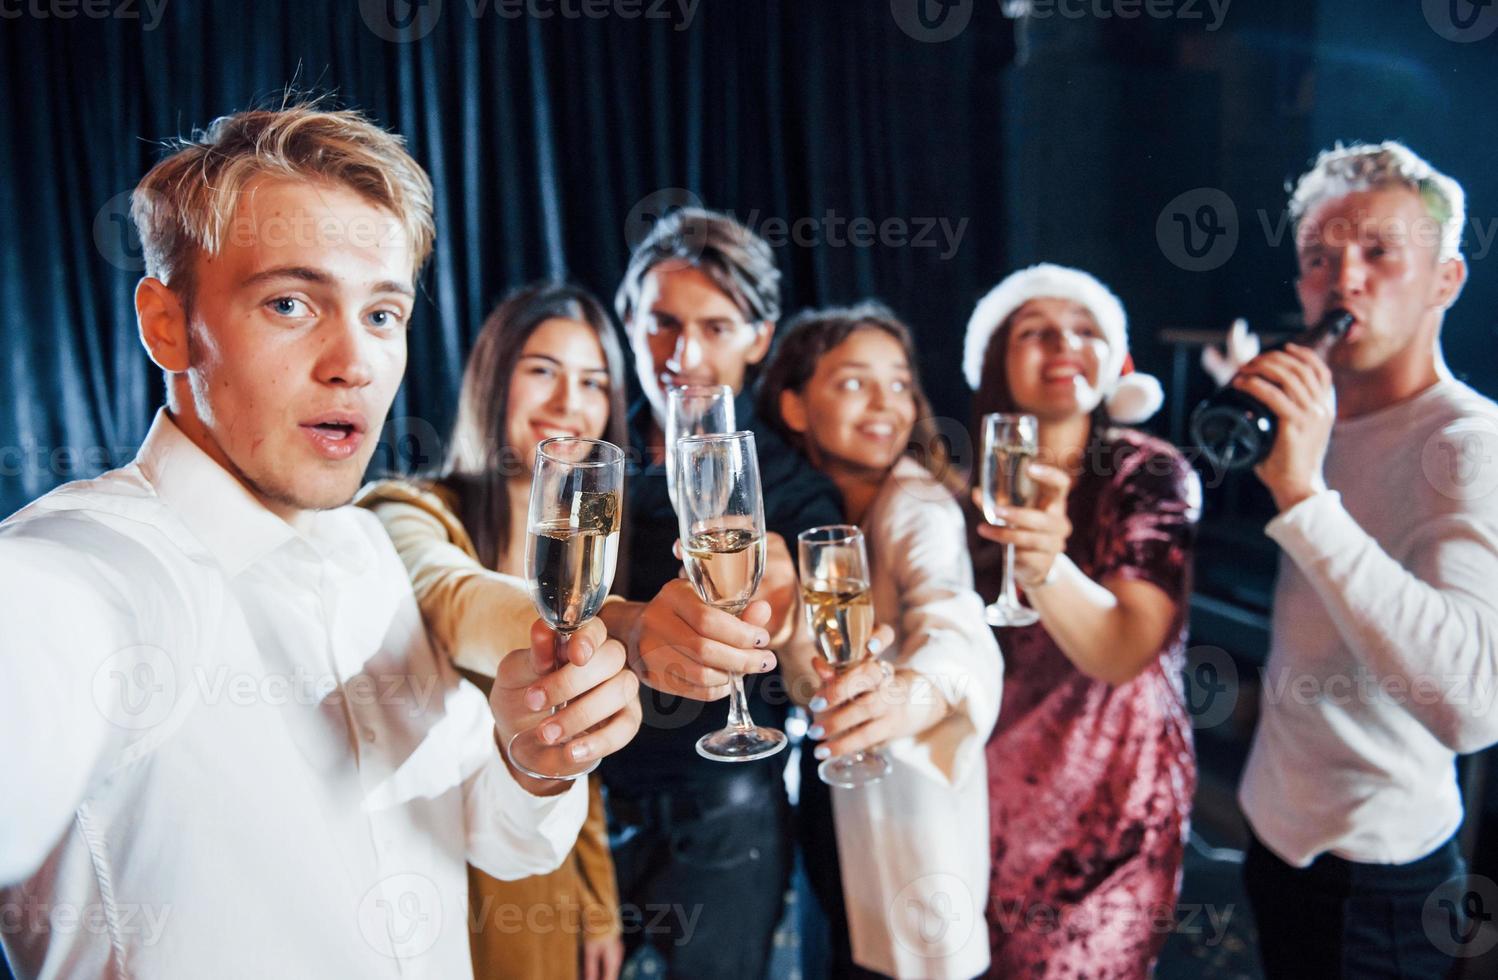 Takes selfie. Group of cheerful friends celebrating new year indoors with drinks in hands photo